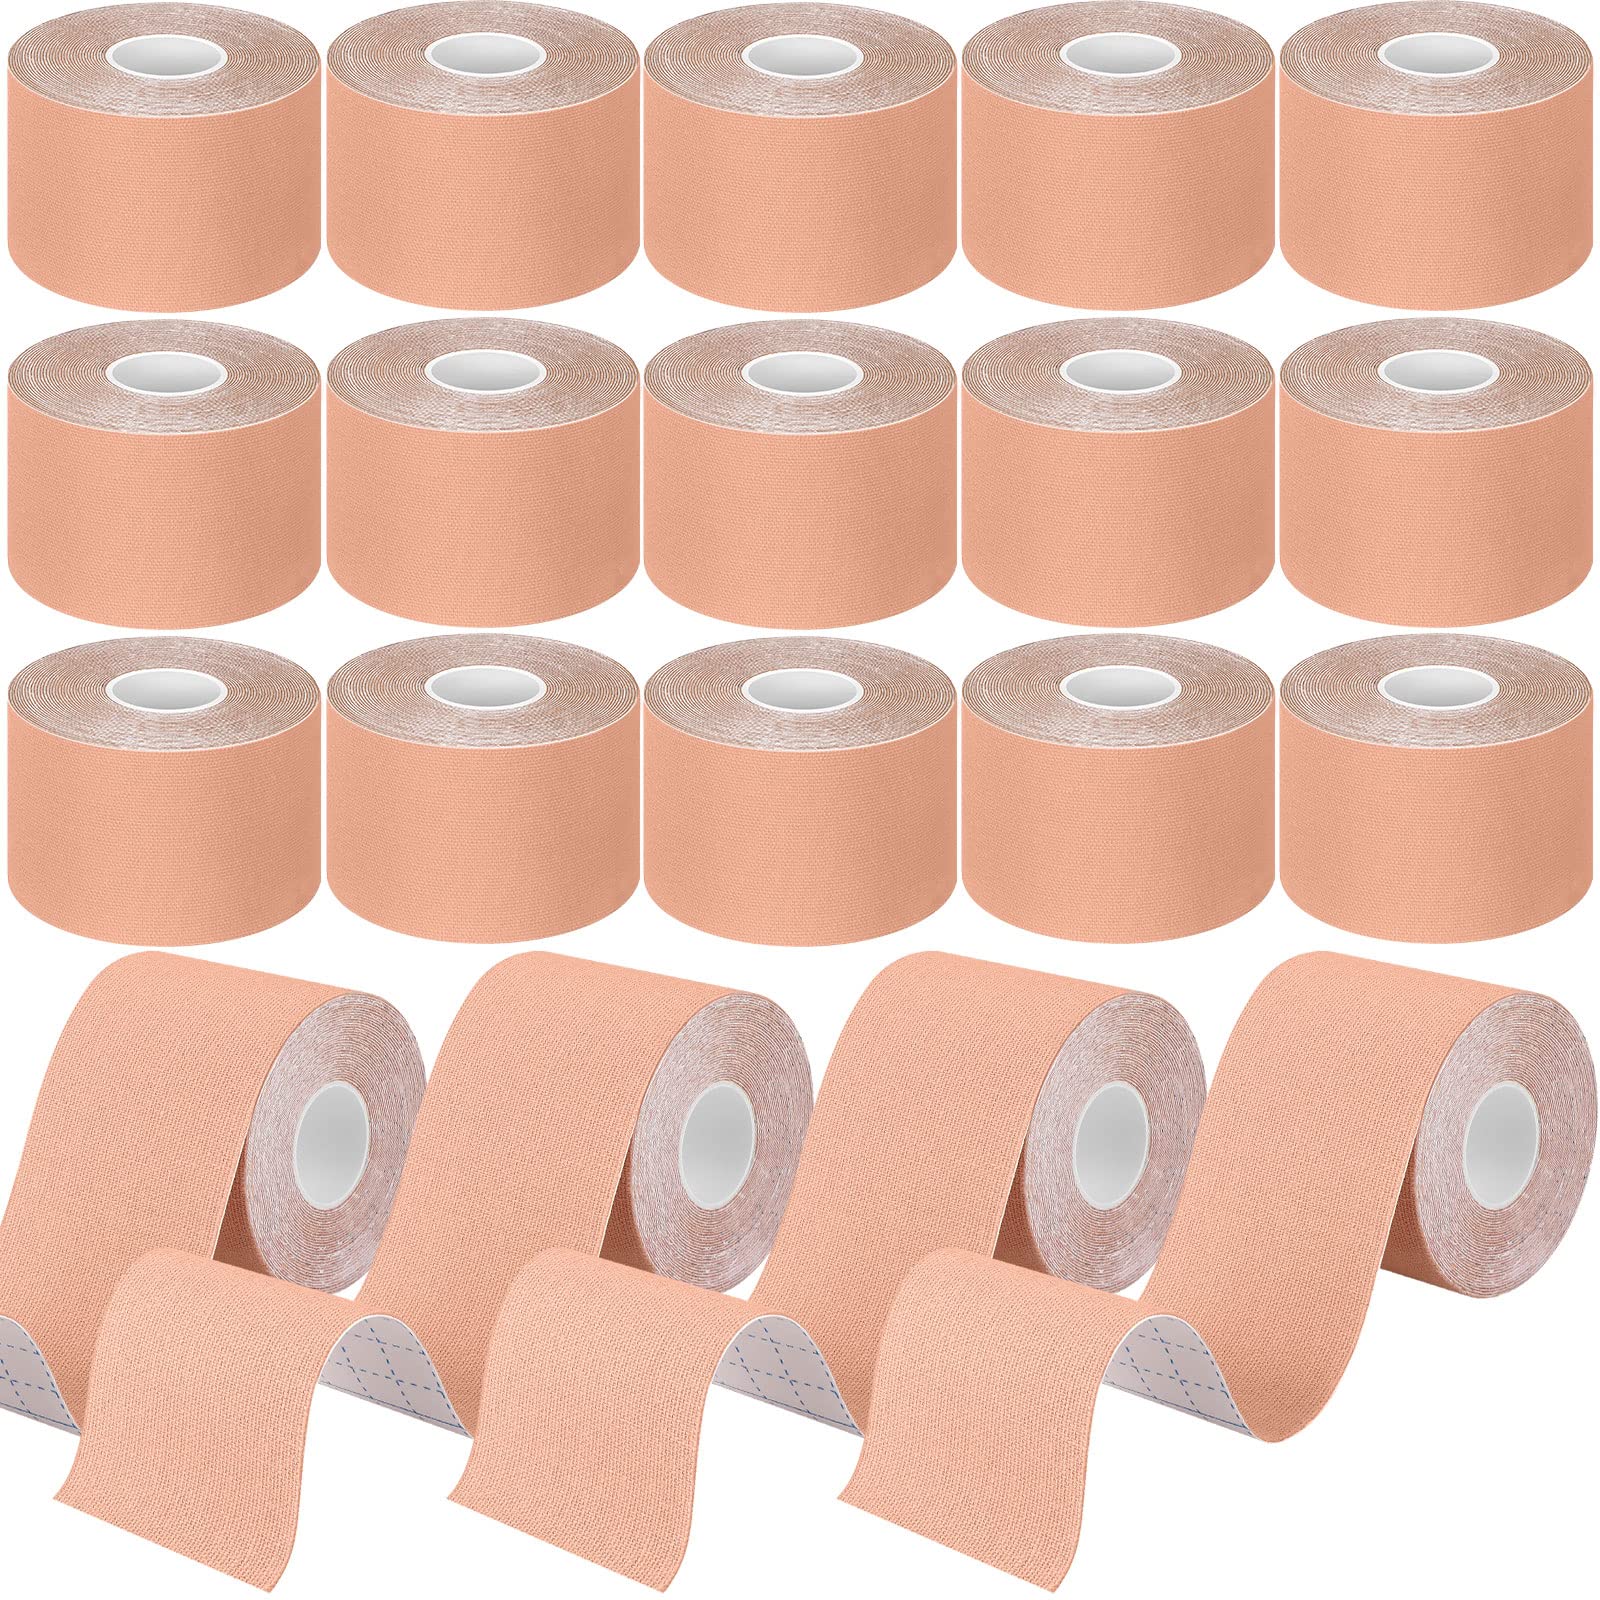 20 Rolls Kinesiology Recovery Tape 2 Inch x 16 ft Cotton Elastic Athletic Tape Breathable Muscle Pain Relief Tape Kinesiology Waterproof Tapes for Gym Fitness Running Tennis Swimming (Beige)